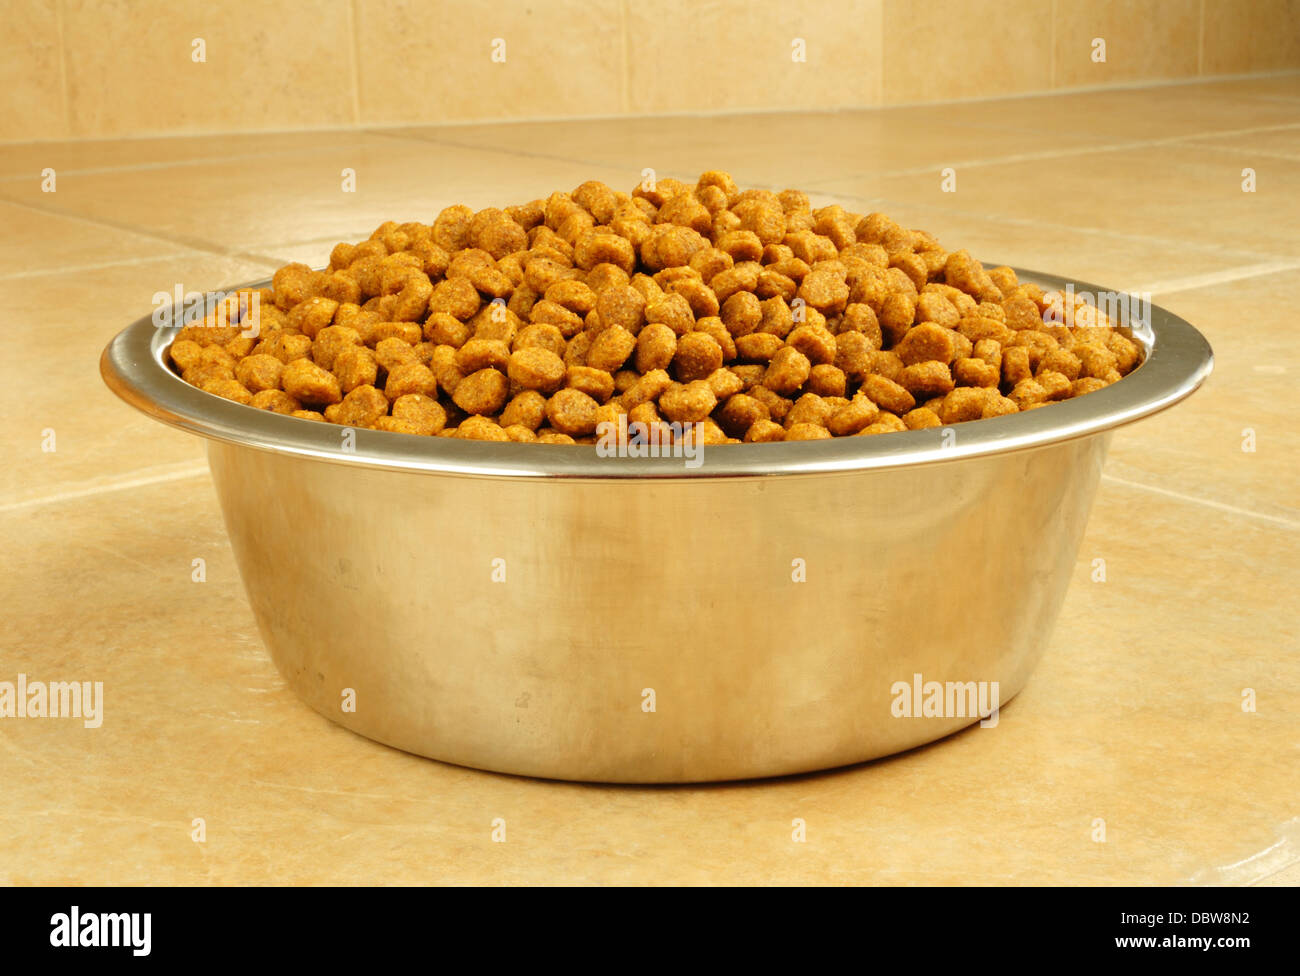 Dry Dog Food in a Stainless Steel Bowl Stock Photo